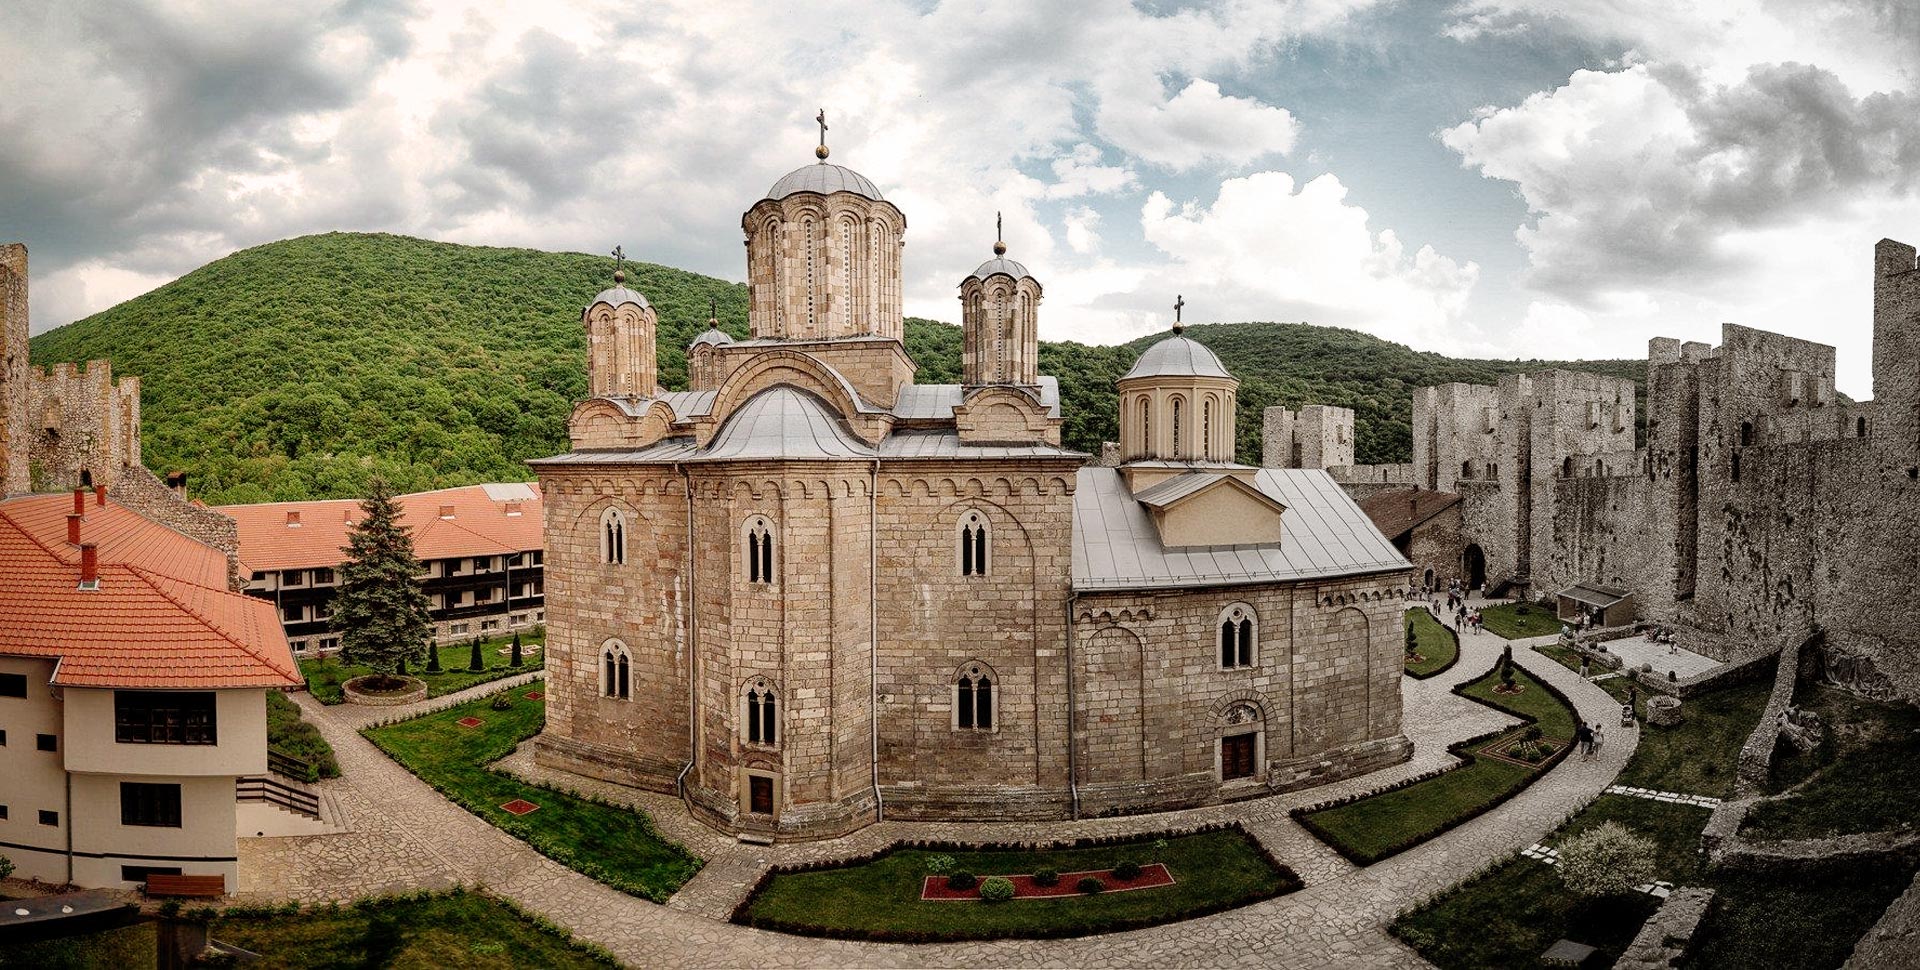 EASTERN SERBIA TOUR: MEDIEVAL MYTHICAL JOURNEY